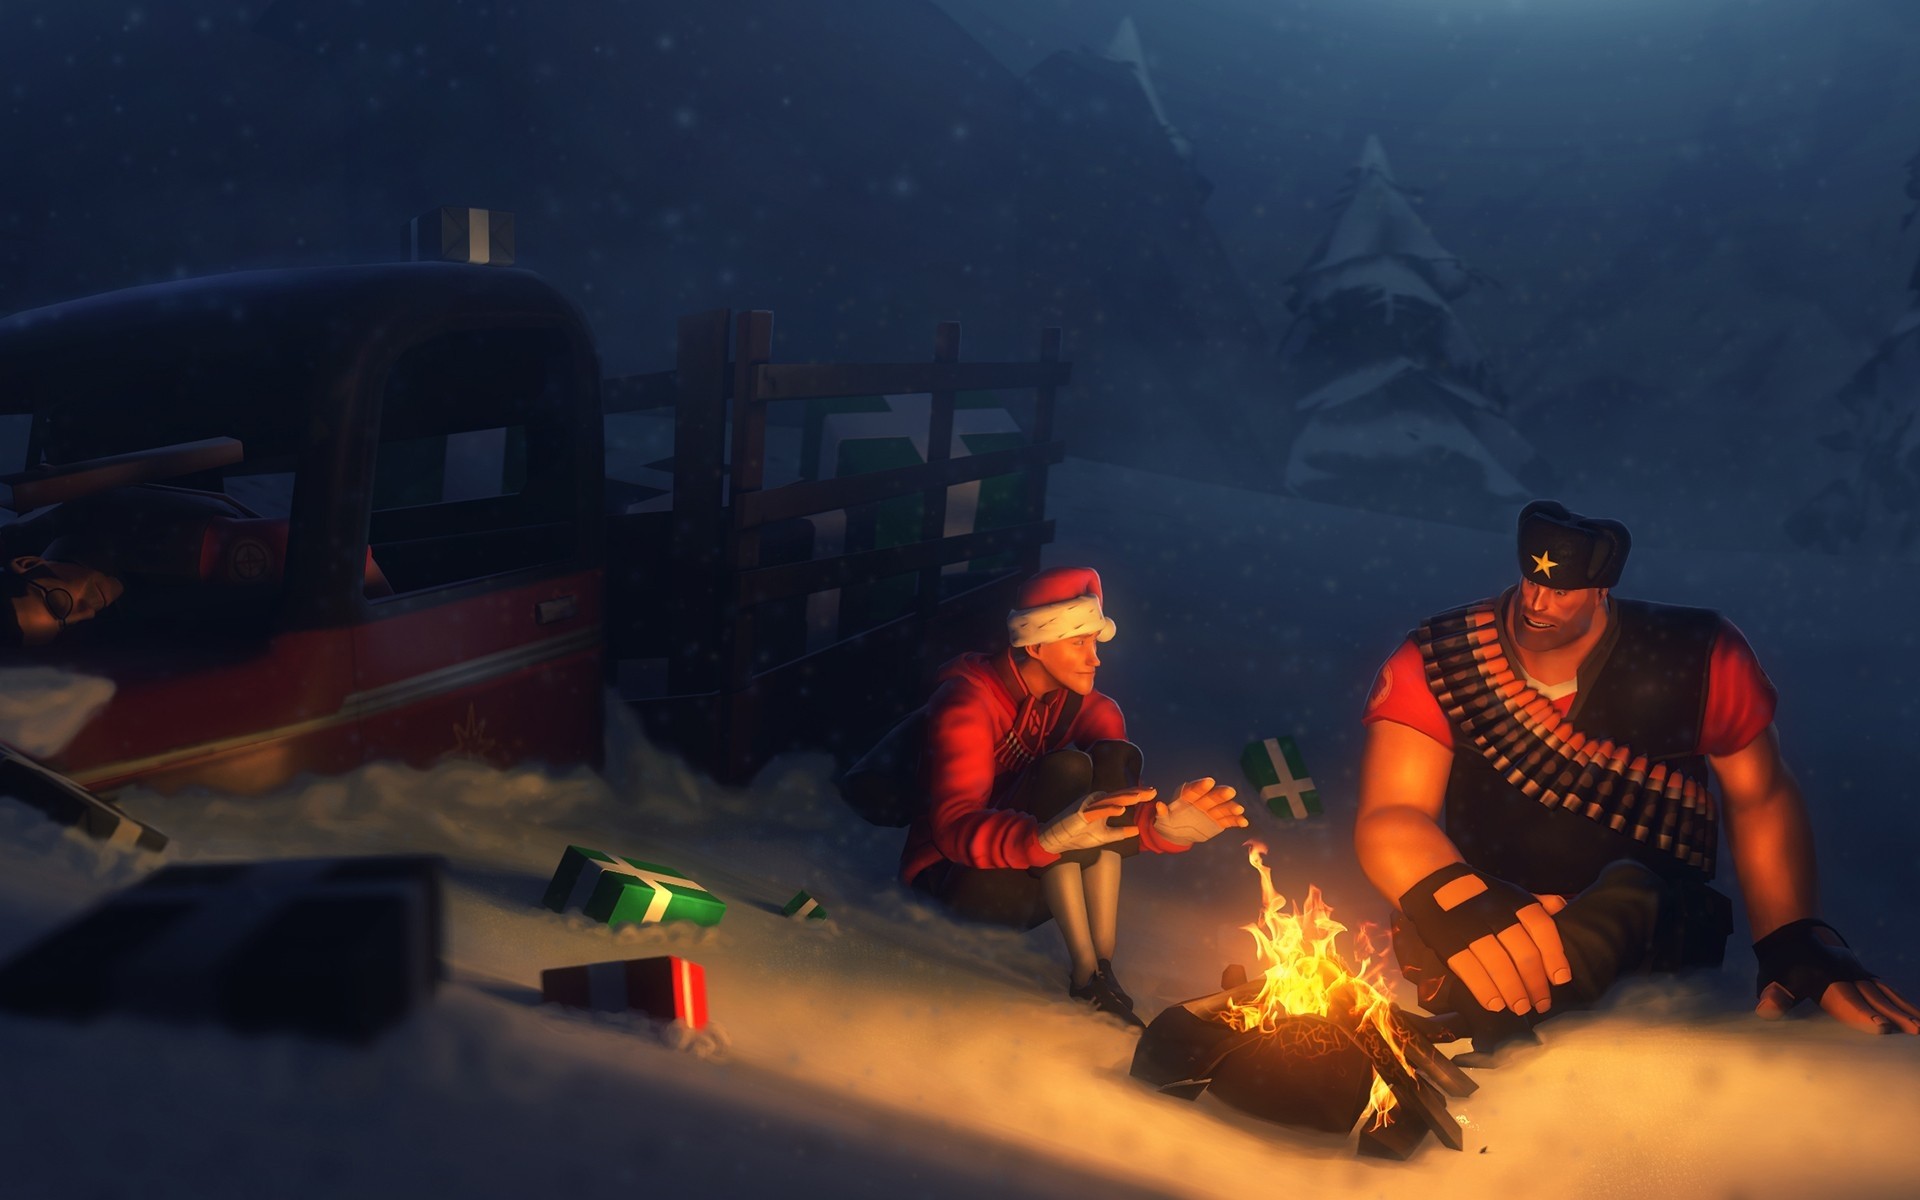 General 1920x1200 video games digital art Team Fortress 2 fire camping presents New Year truck Scout (TF2) Sniper (TF2) snow campfire PC gaming video game art Heavy (TF2)